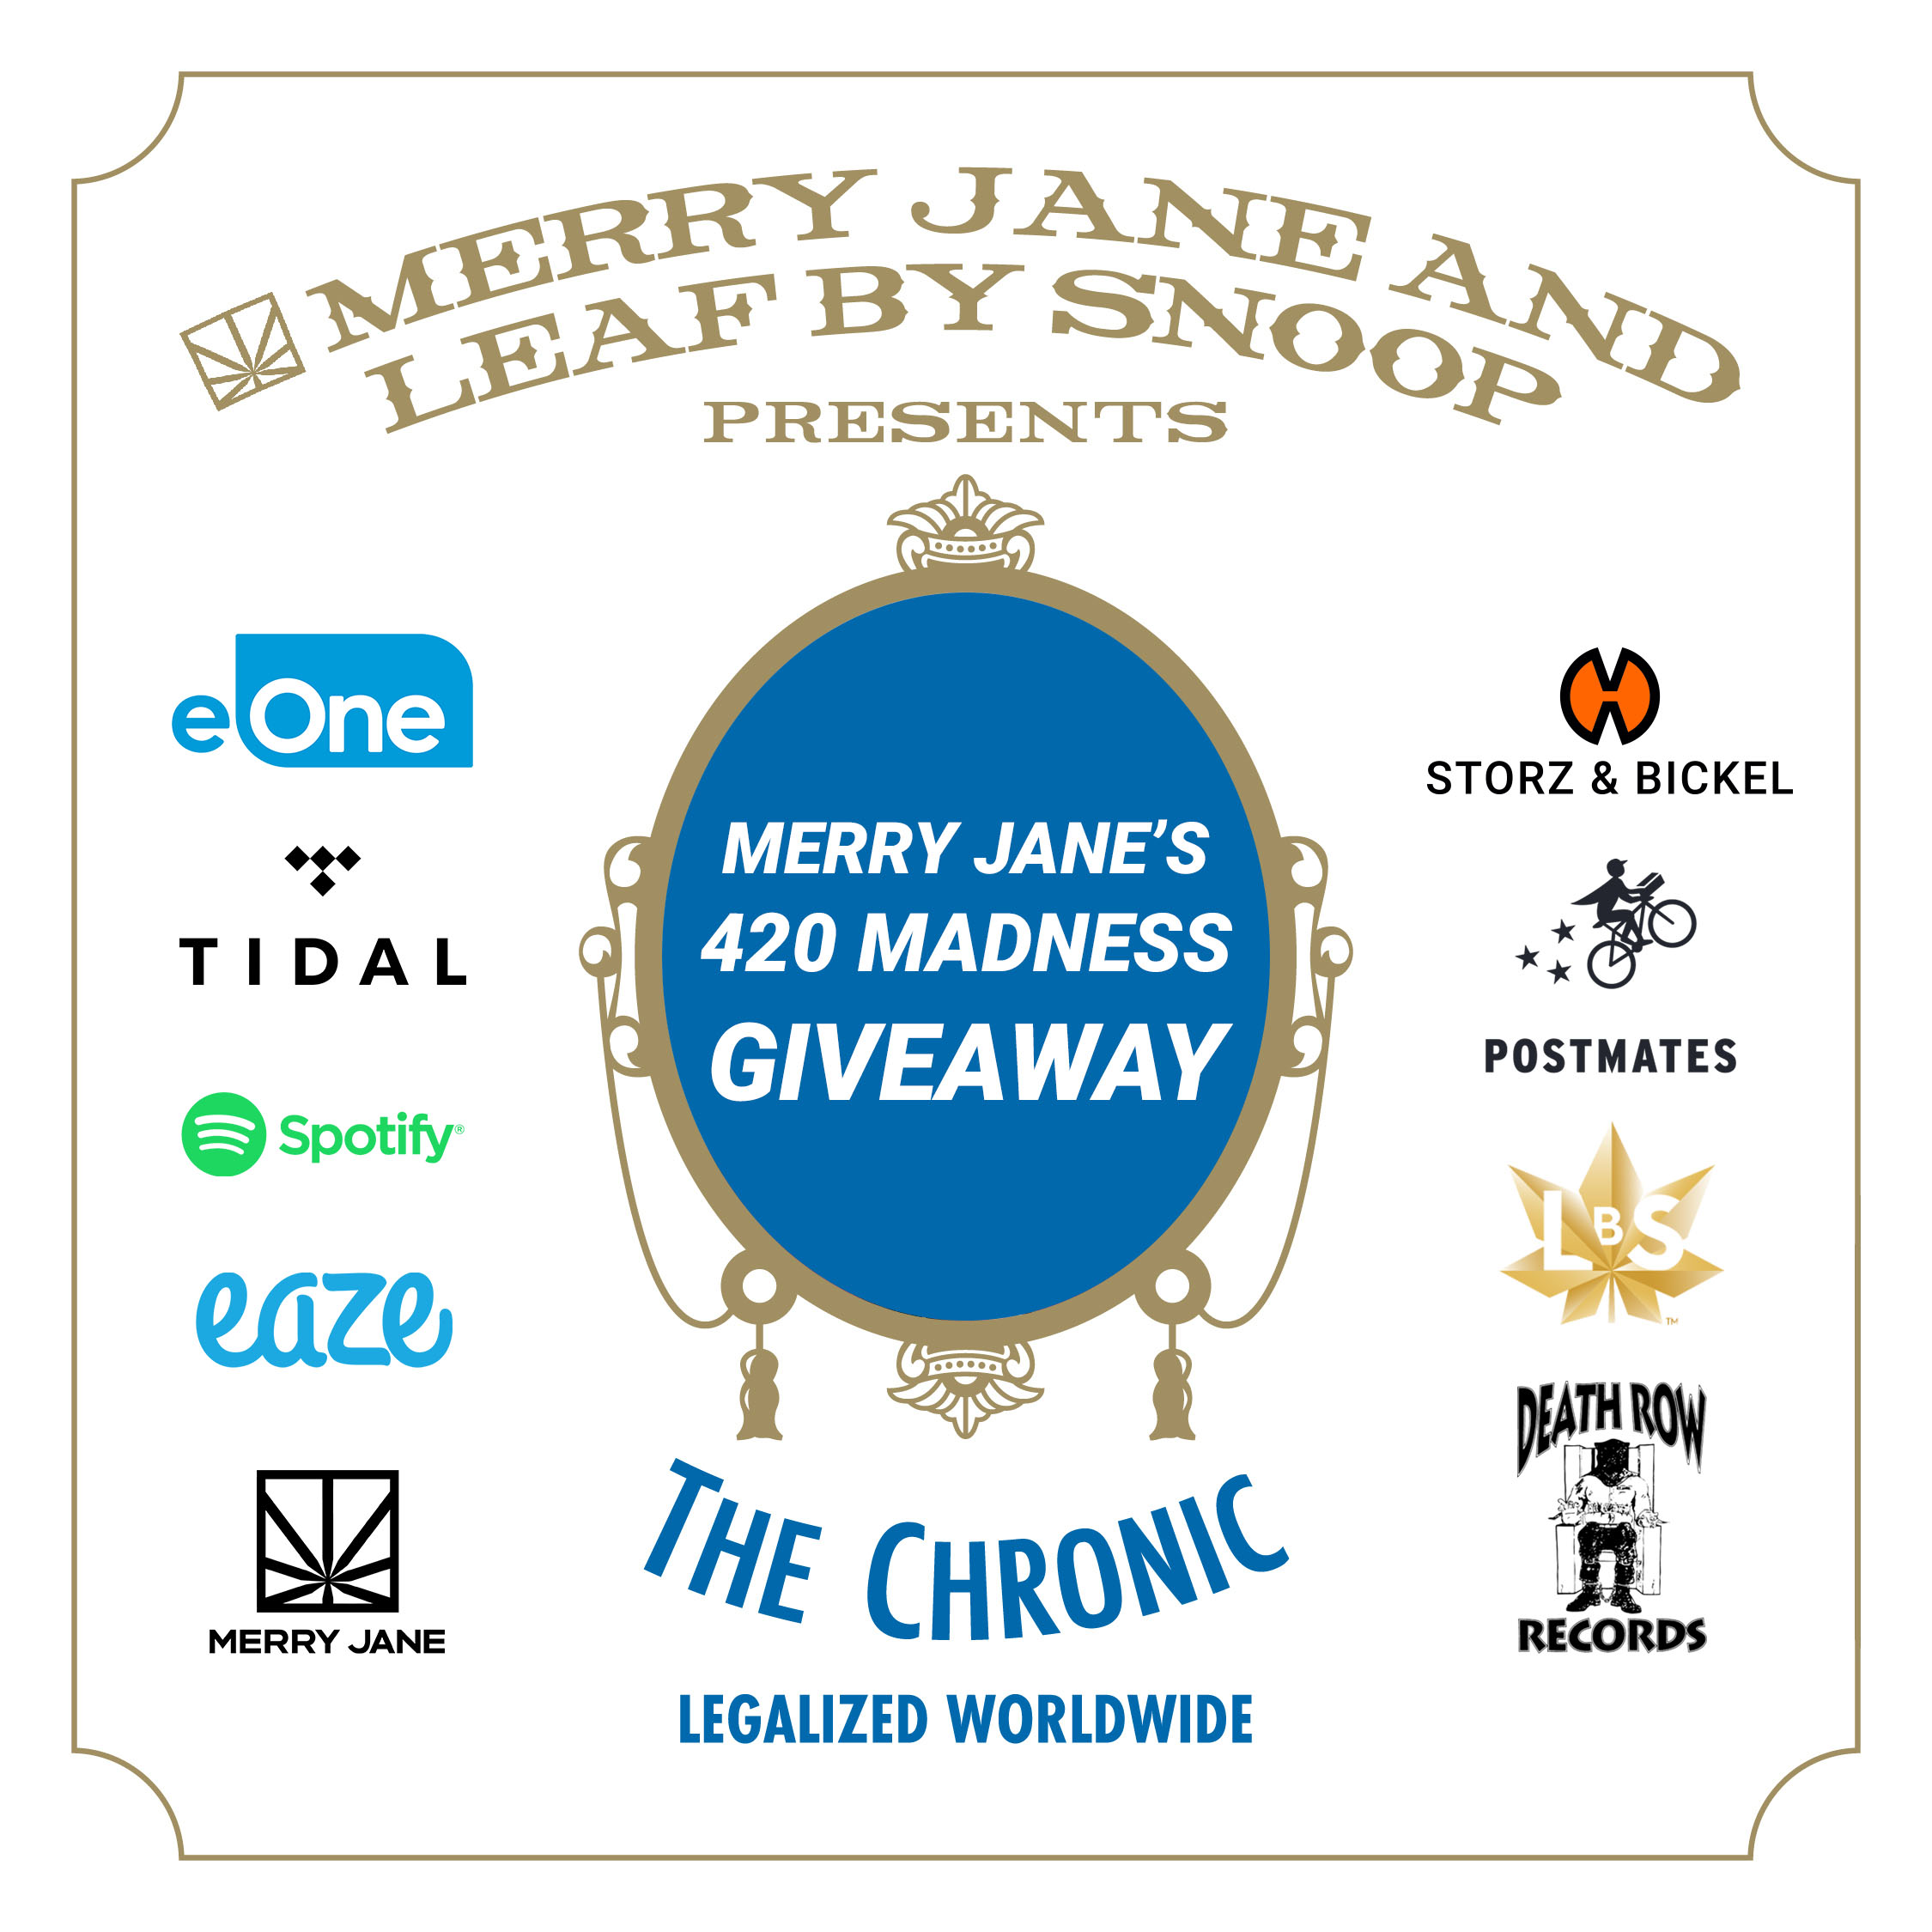 Check Out MERRY JANE’s 4/20 Giveaways in Support of Snoop and “The Chronic”